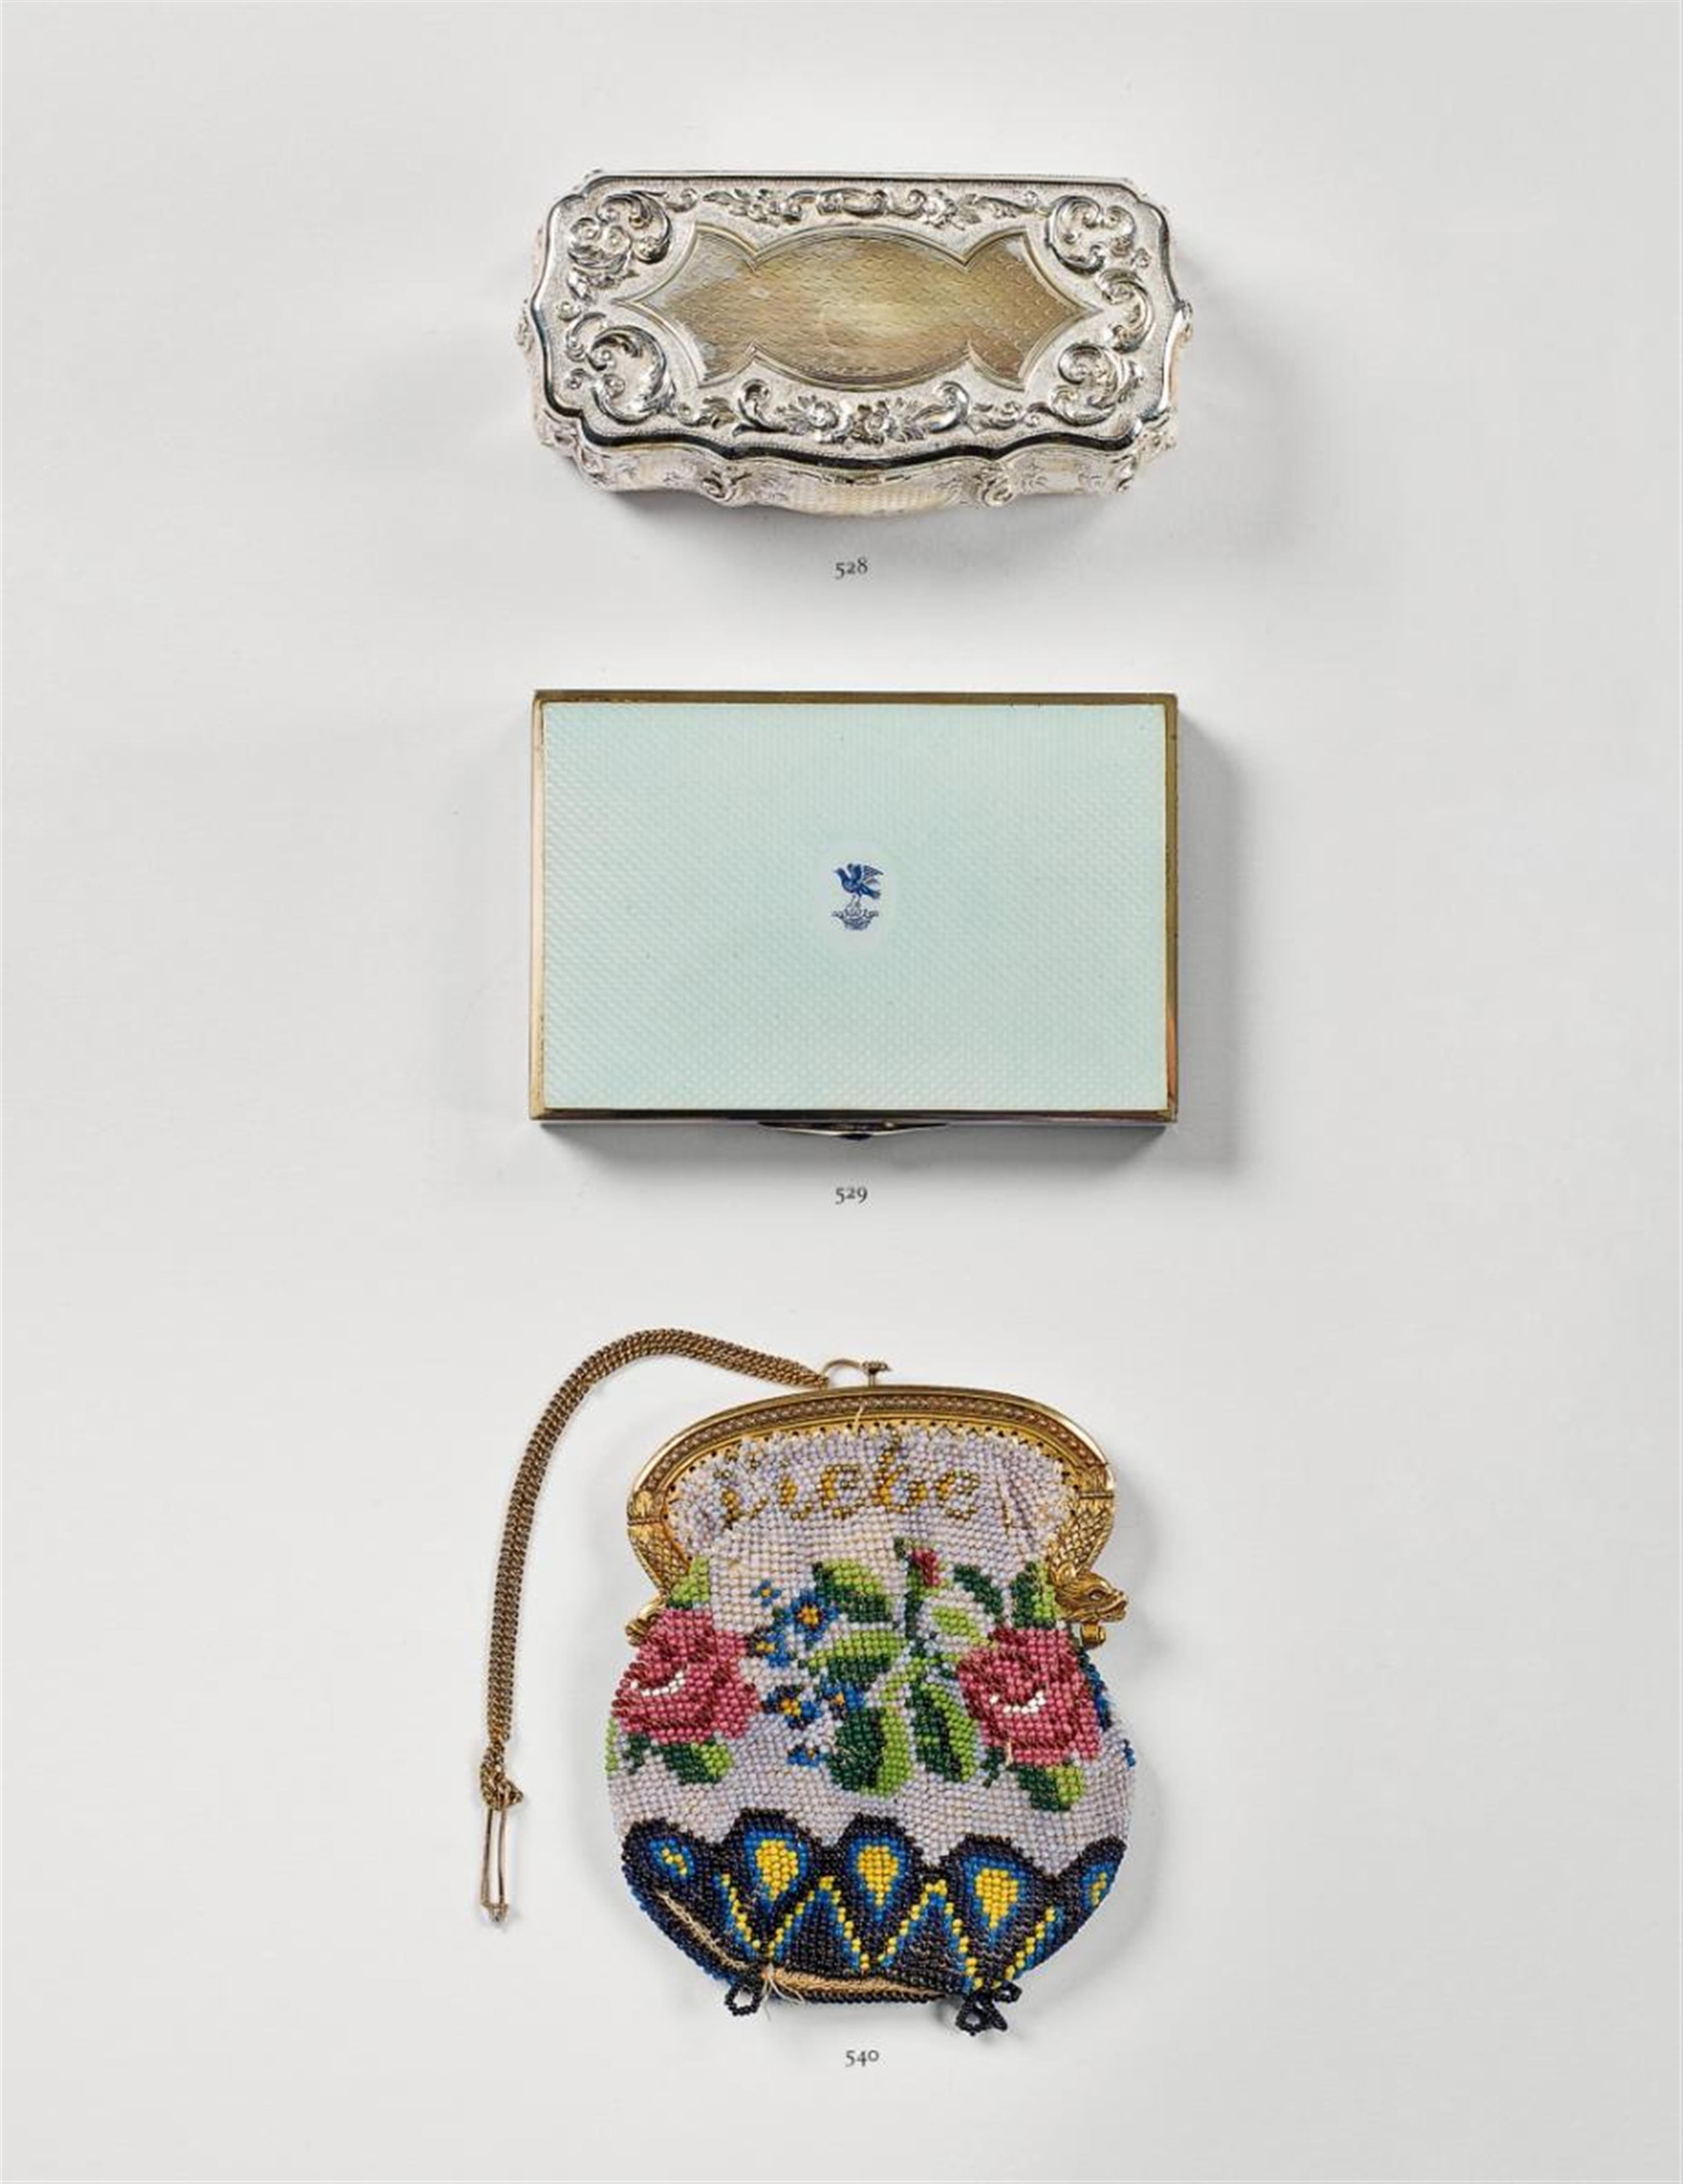 A silver and opaline-blue translucide enamel cigarette case with heraldic emblem to lid - image-1